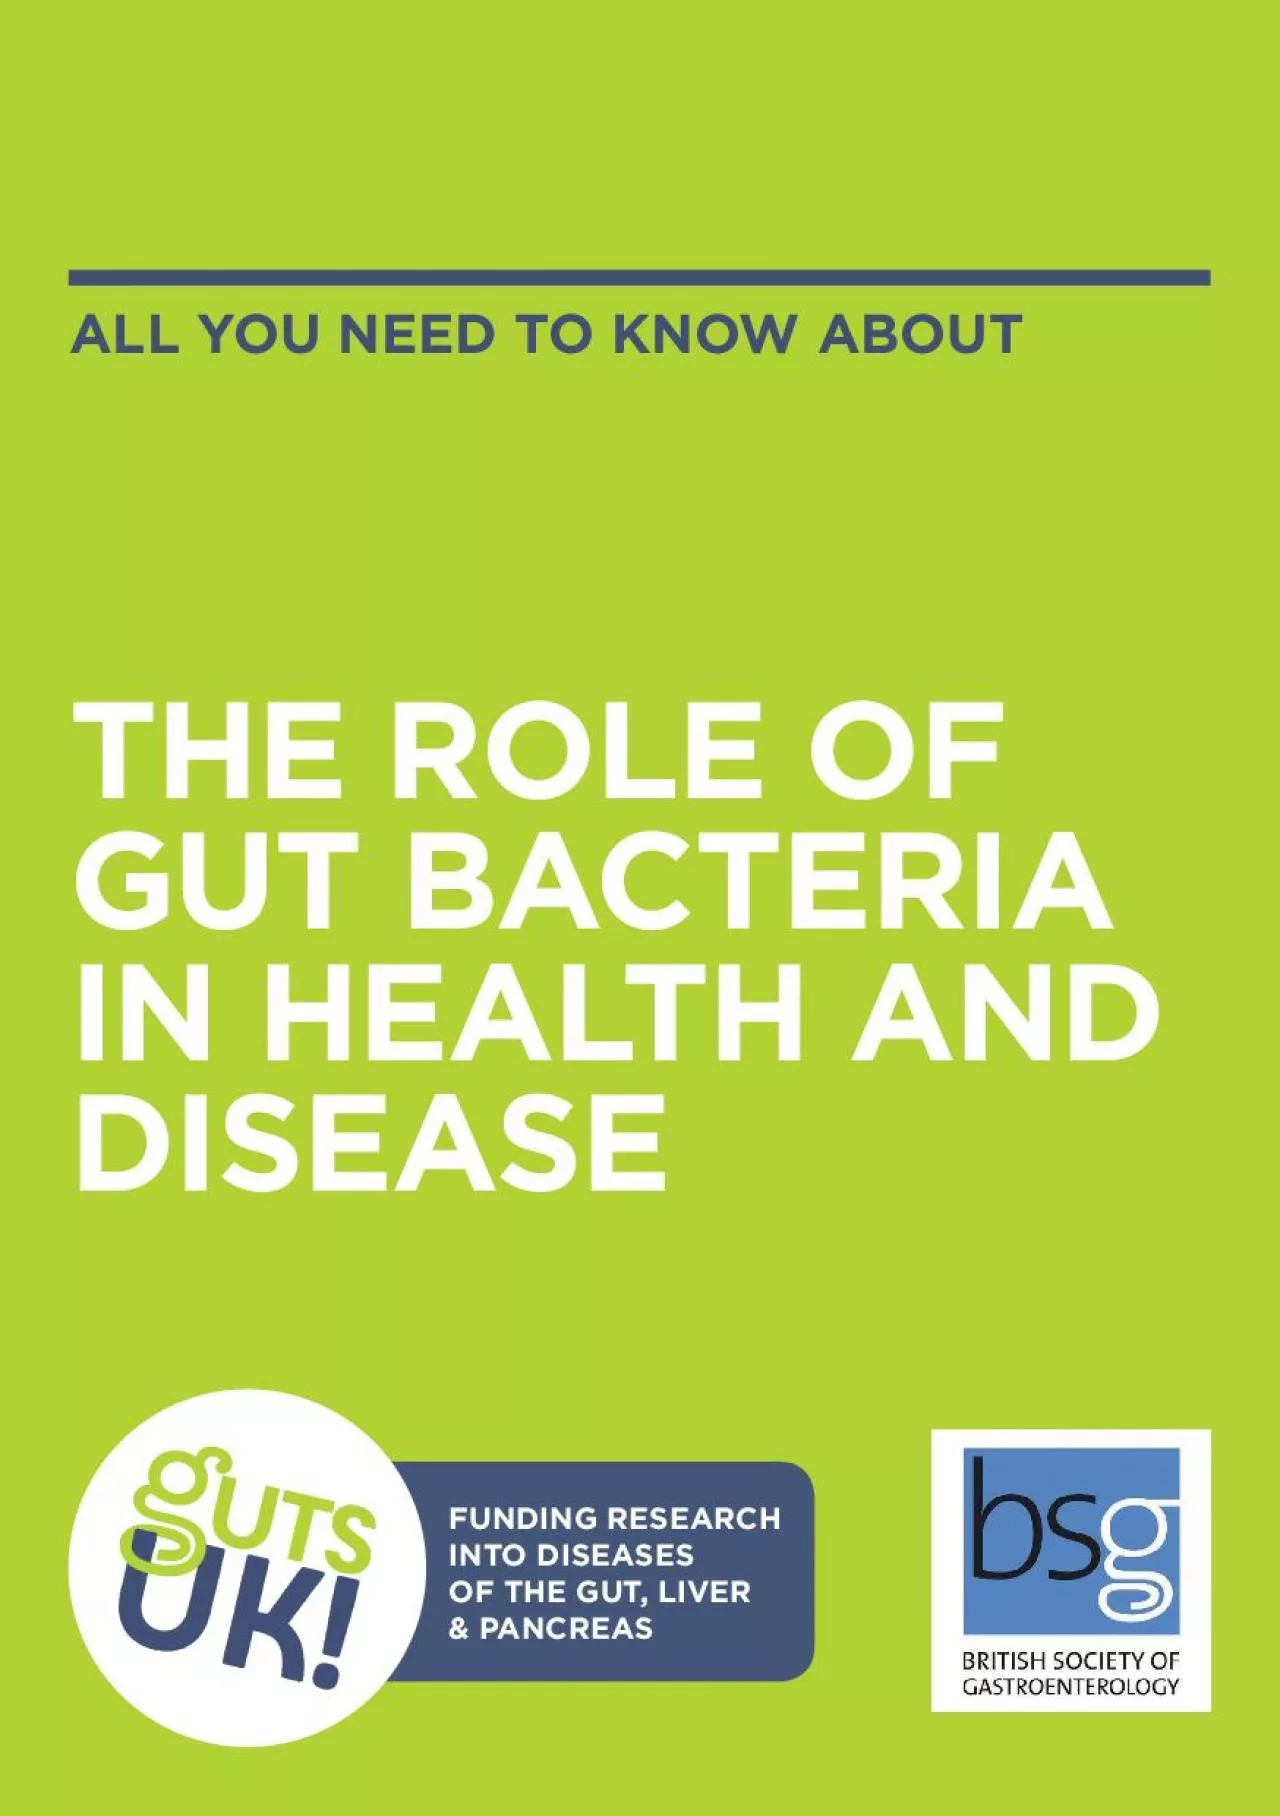 ALL YOU NEED TO KNOW ABOUTTHE ROLE OF GUT BACTERIA IN HEALTH AND DISEA